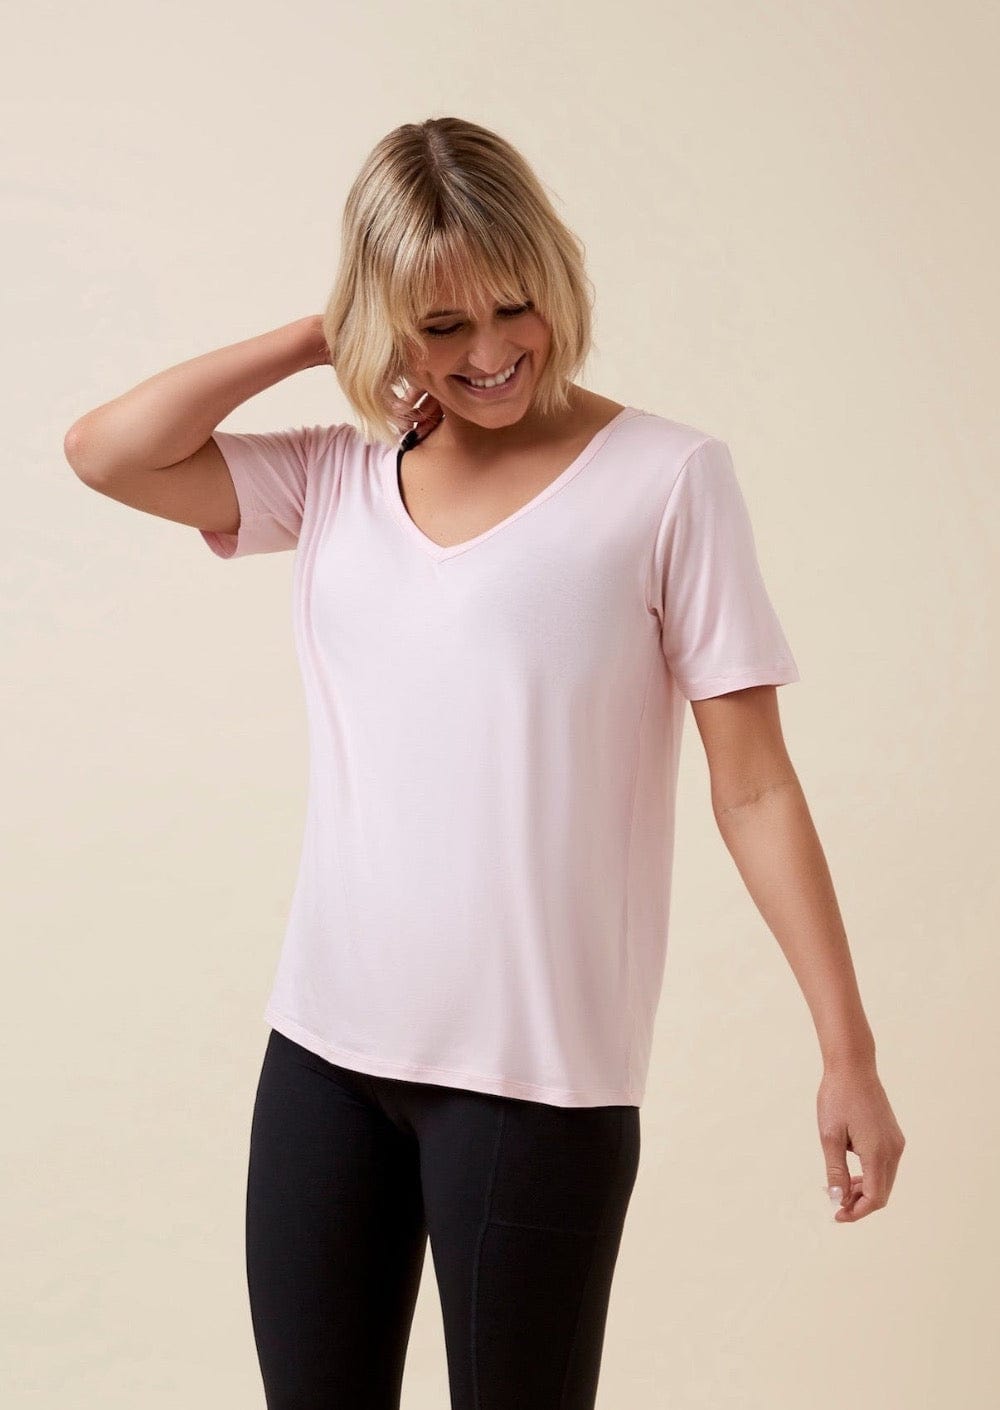 Thery Group TEE Powder Pink The Me Bamboo Slouch Tee  - front view new mother no belly